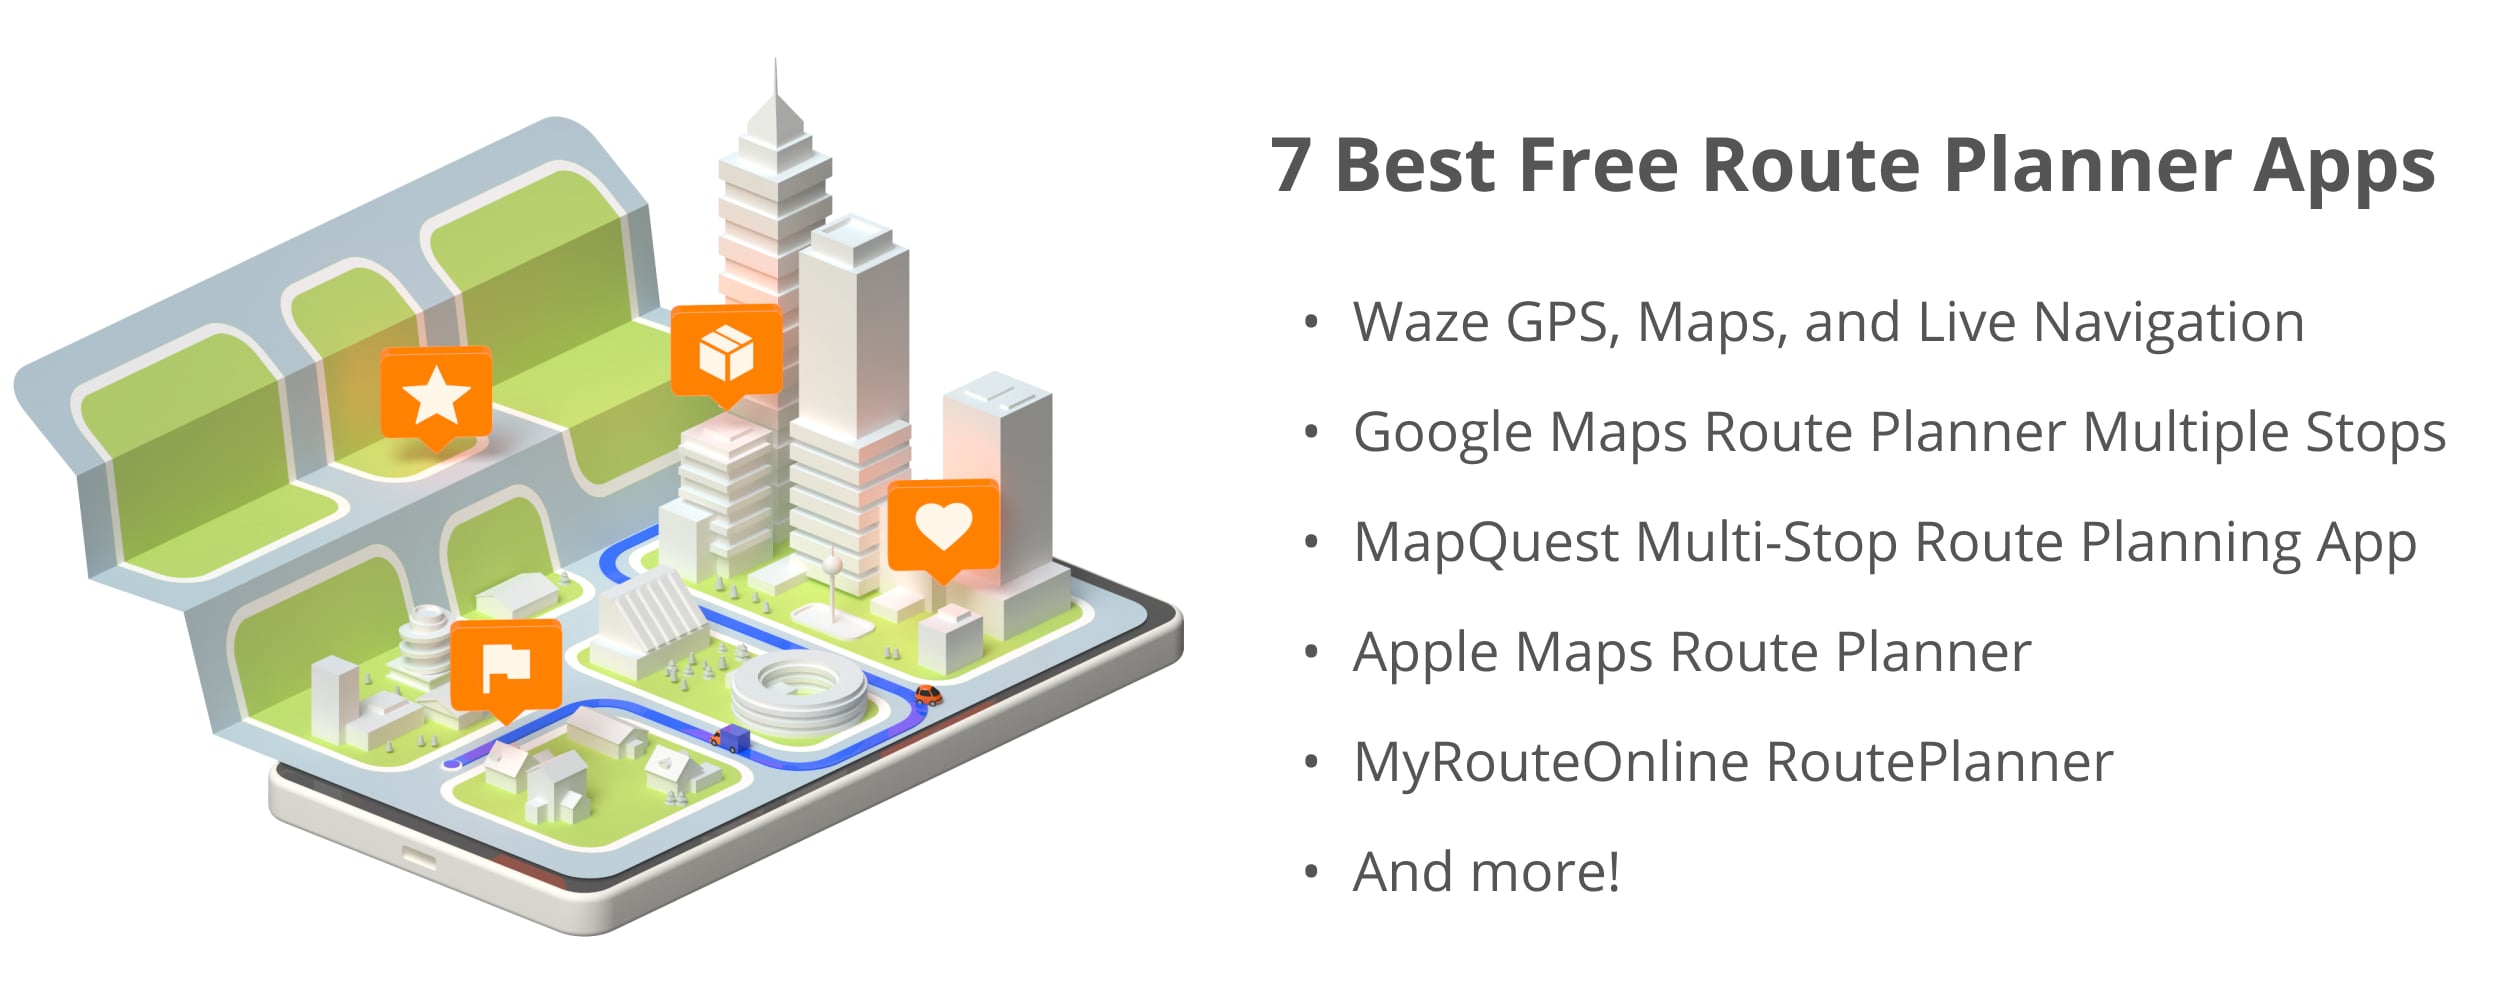 7 best free route planner apps with multiple stops that are suitable for delivery businesses.